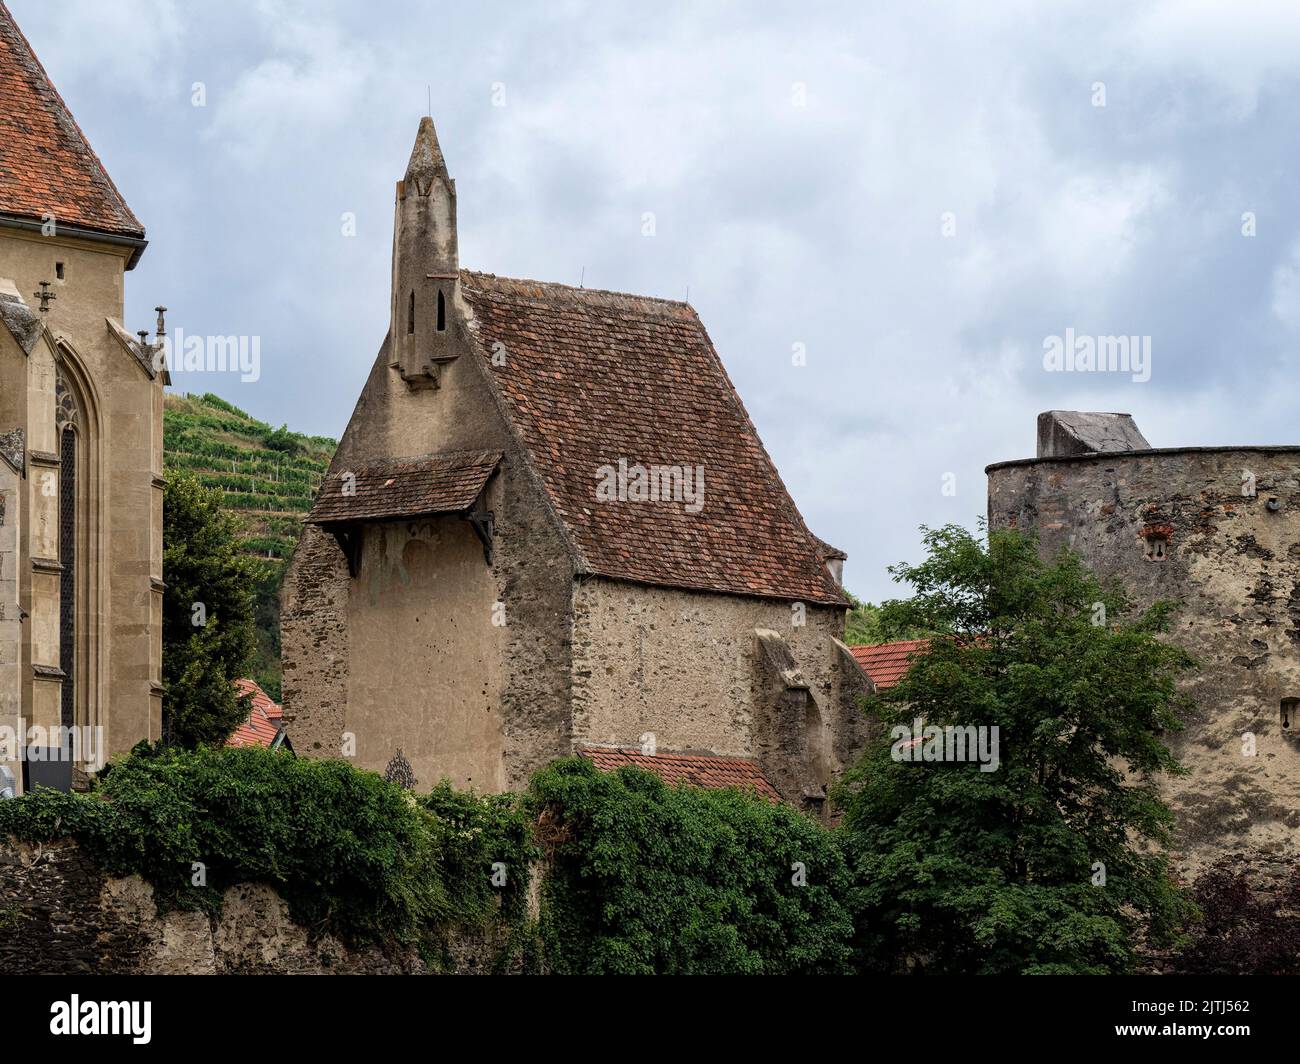 SSANKT MICHAEL, AUSTRIA - JULY 13, 2019:  Exterior view of the  ossuary (Karner) of the fortified church of Wehrkirche St. Michael Stock Photo